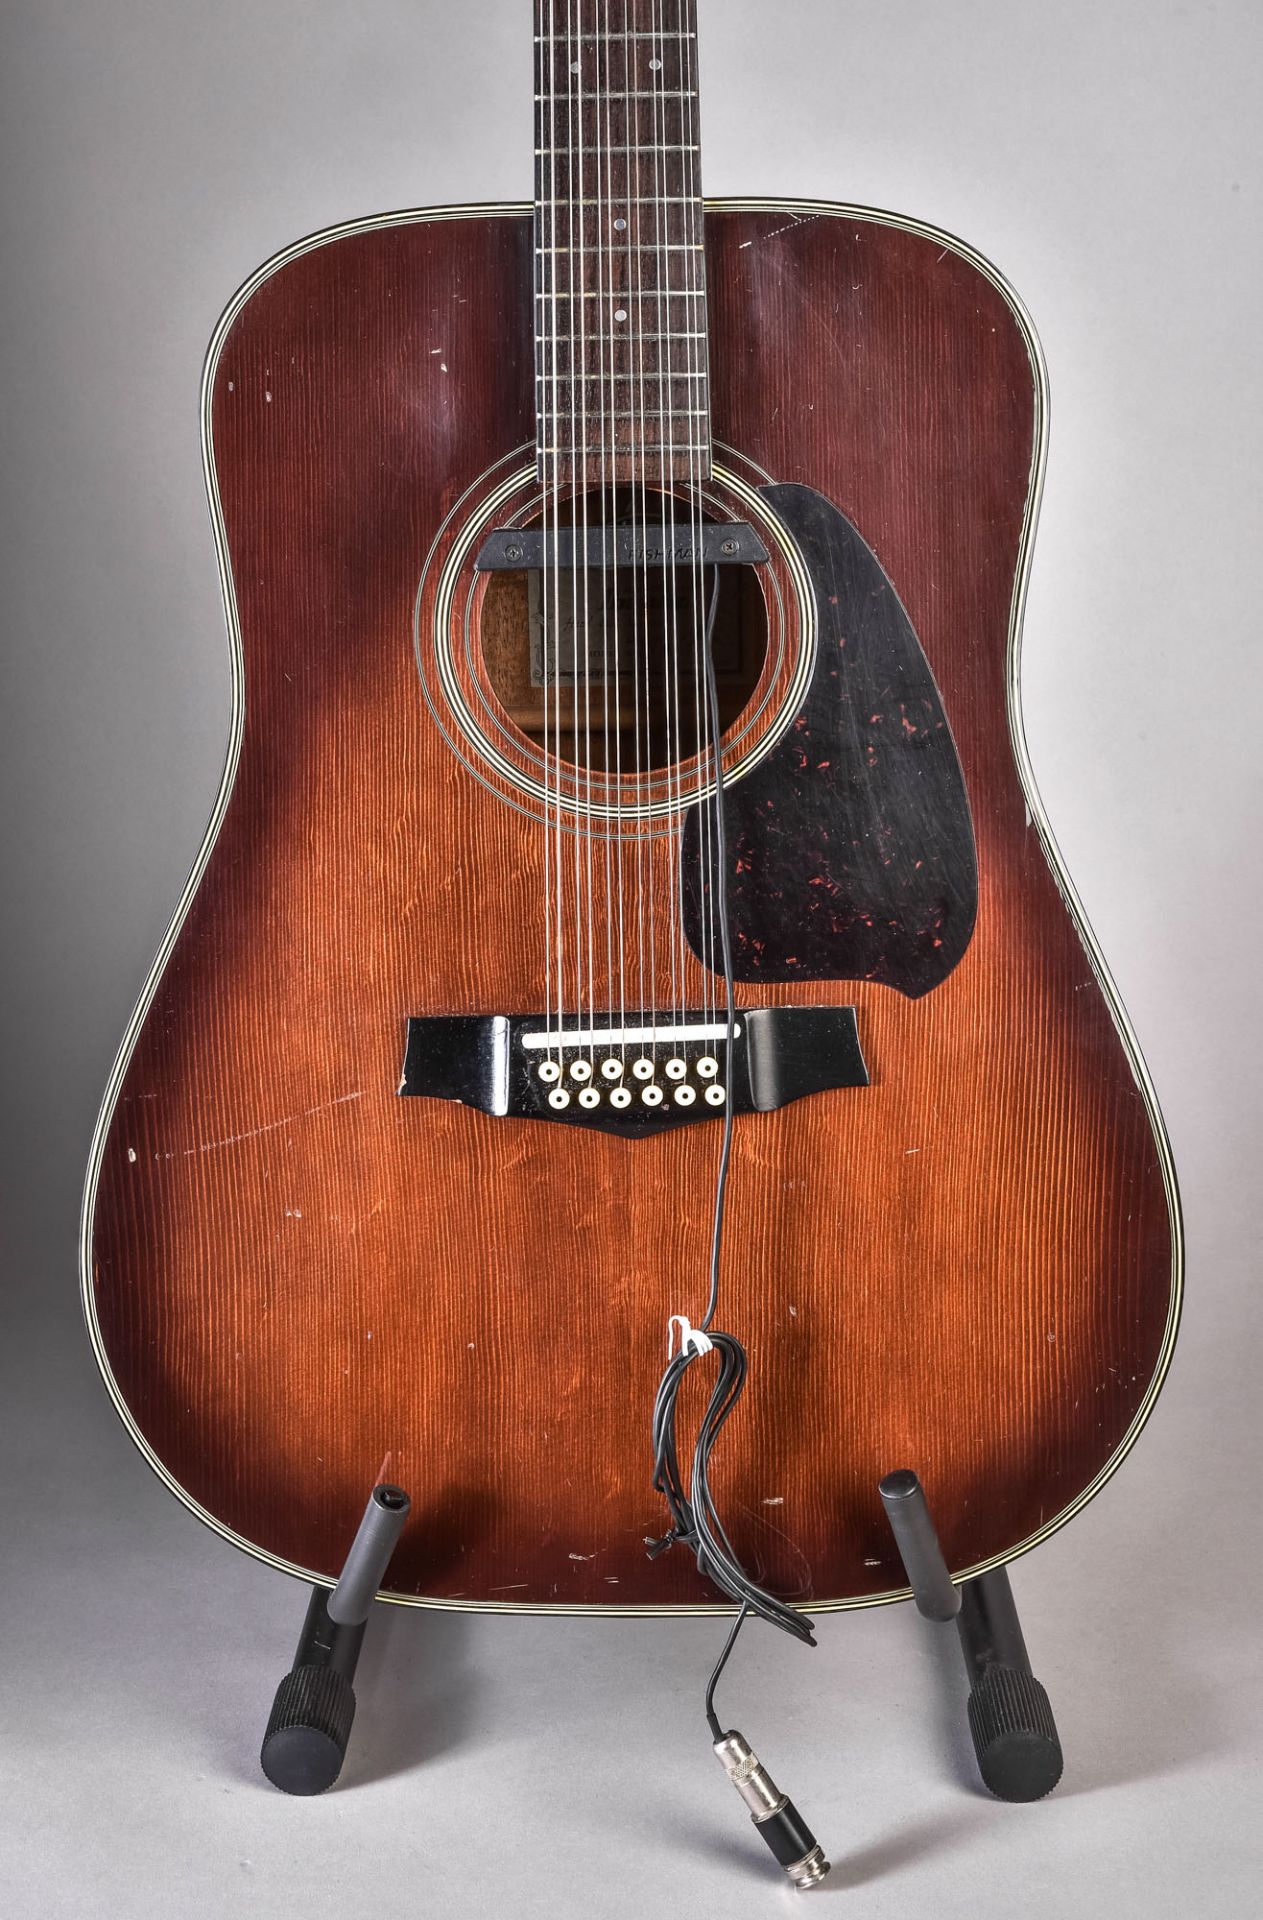 Vintage 12-string acoustic western guitar Ibanez, model V302 TV, dreadnought, with a later built-in - Image 3 of 9